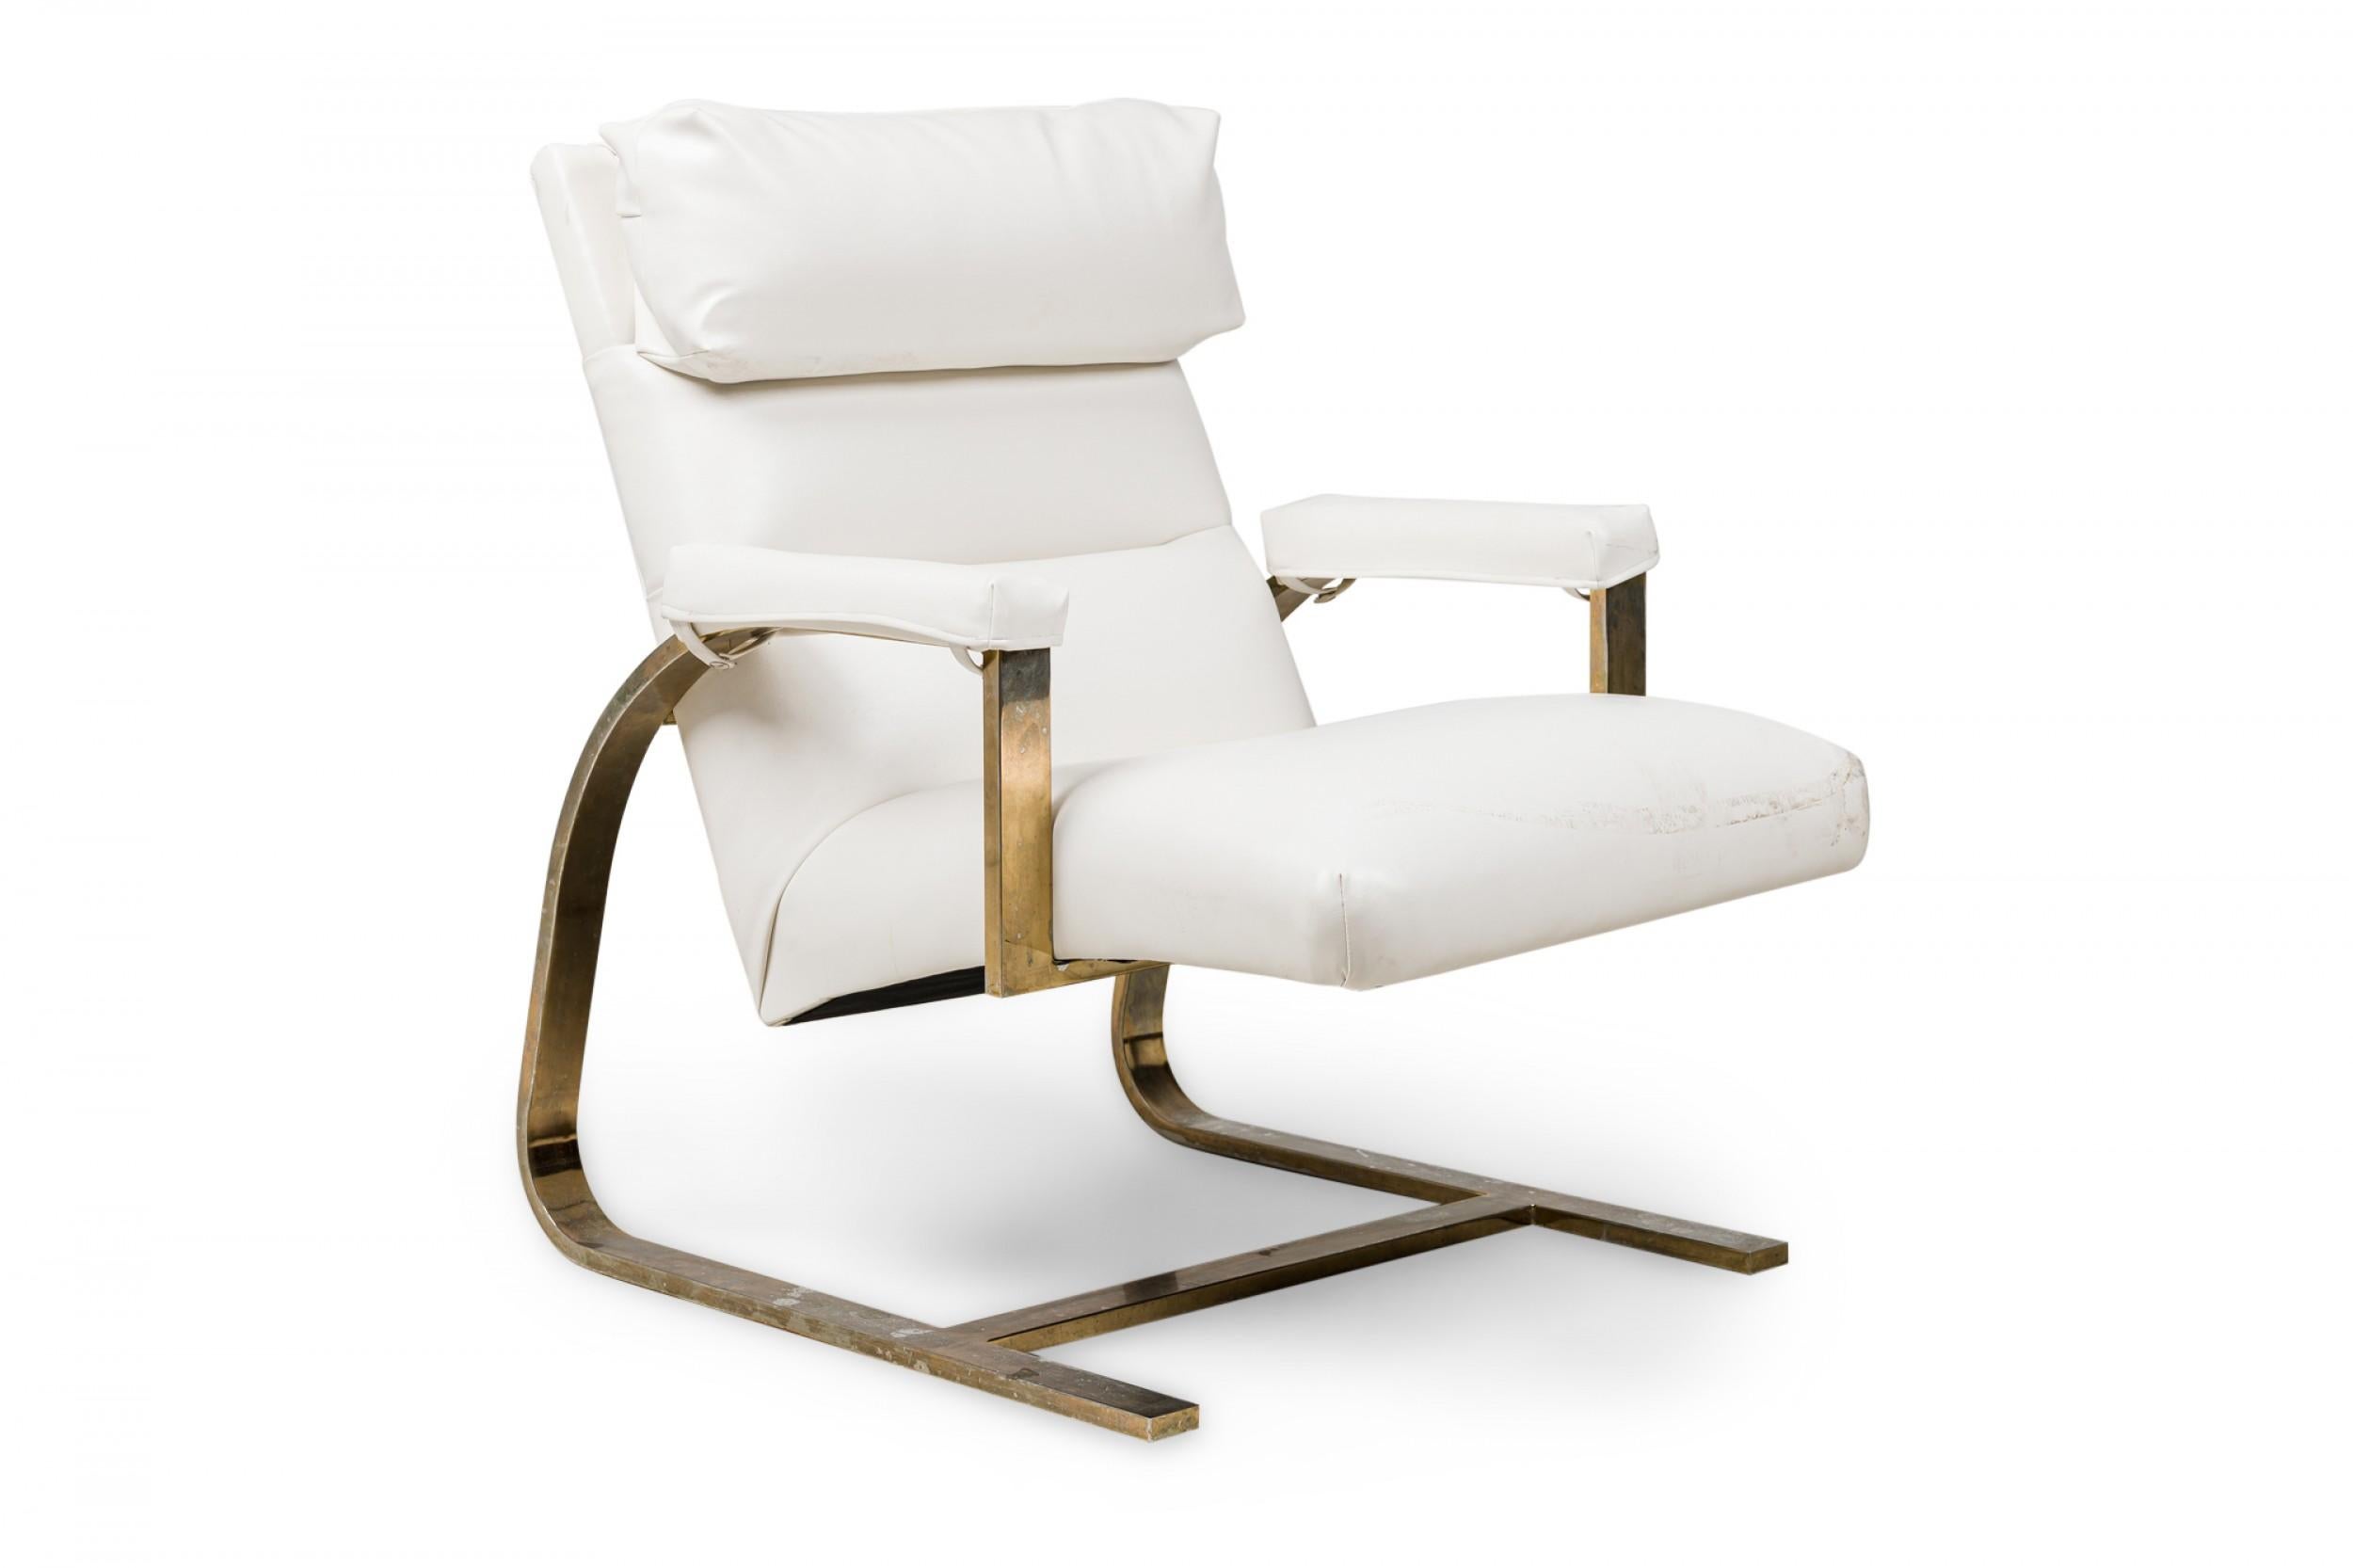 PAIR of midcentury American brass flat bar, cantilevered armchairs in a relaxed back-tilted position, with padded head and armrests, upholstered in white leather. (Milo Baughman) (PRICED AS PAIR).